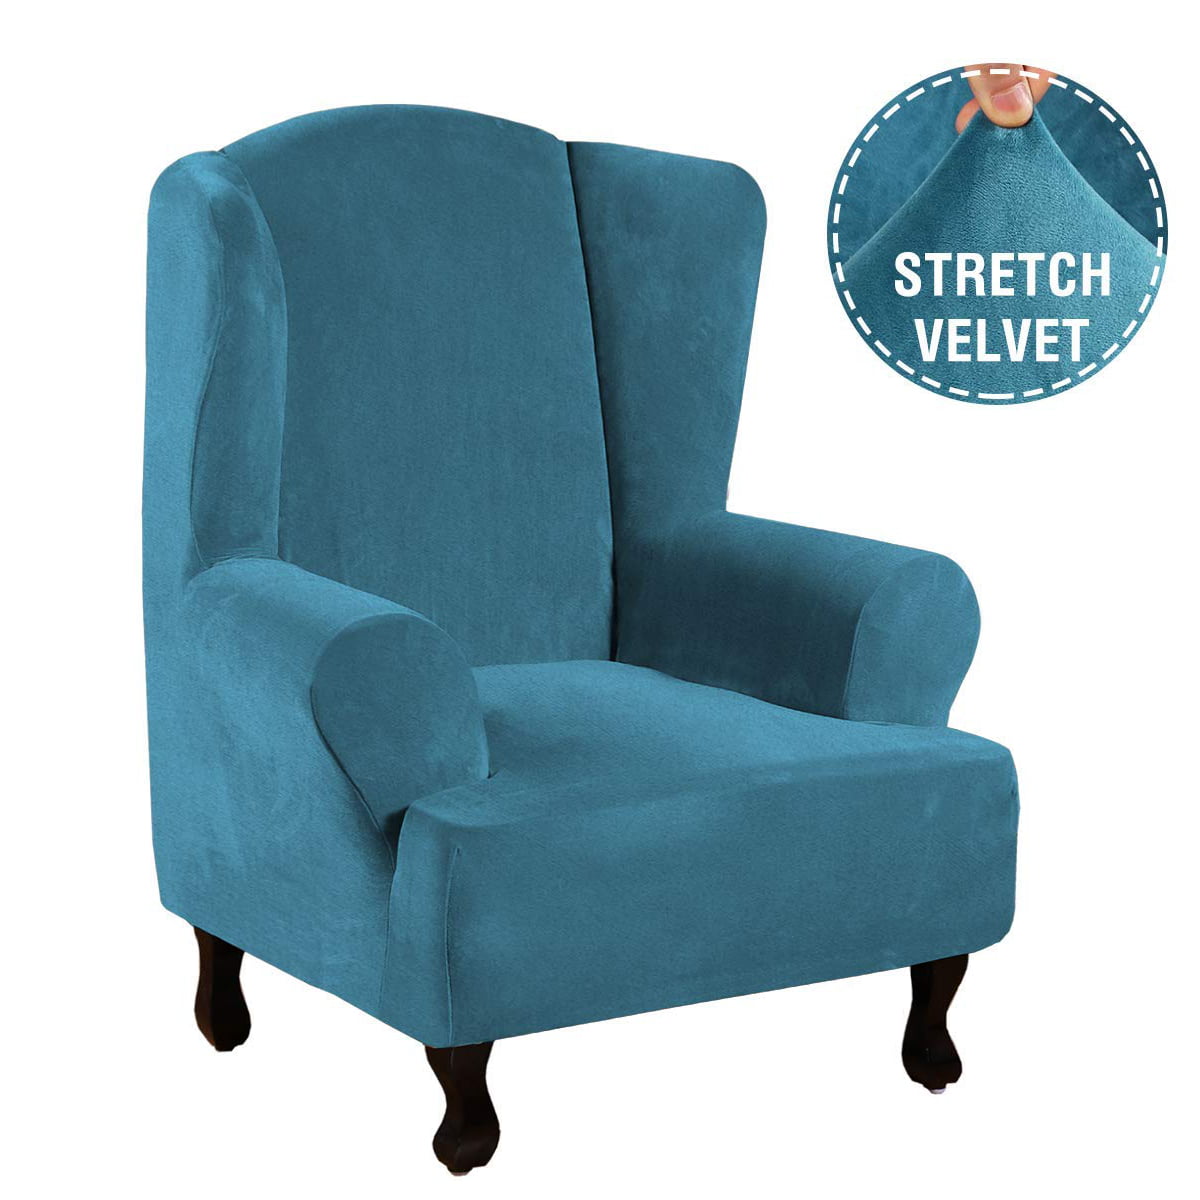 Details about   Easy-Going Stretch Wingback Chair Sofa Slipcover 1-Piece Sofa Cover Furniture